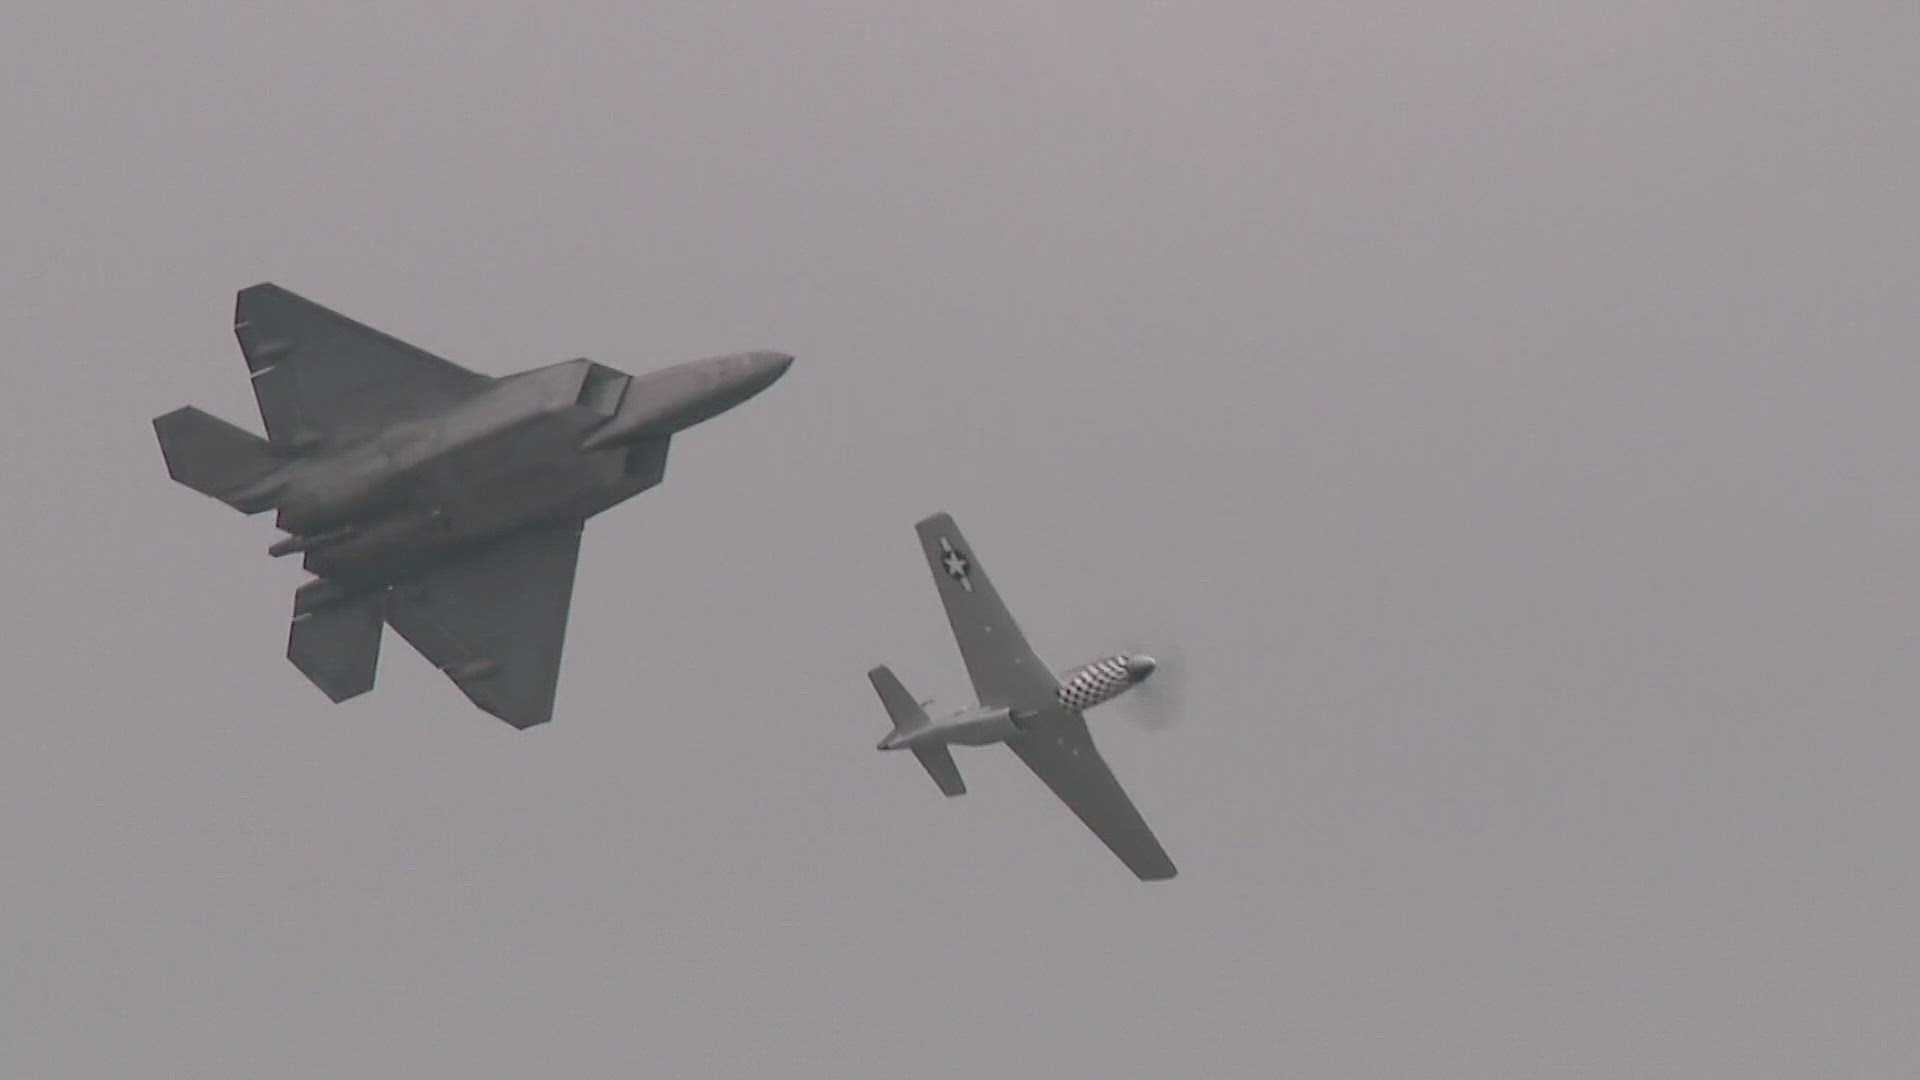 Sights and sounds from the first day of the Columbus Air Show